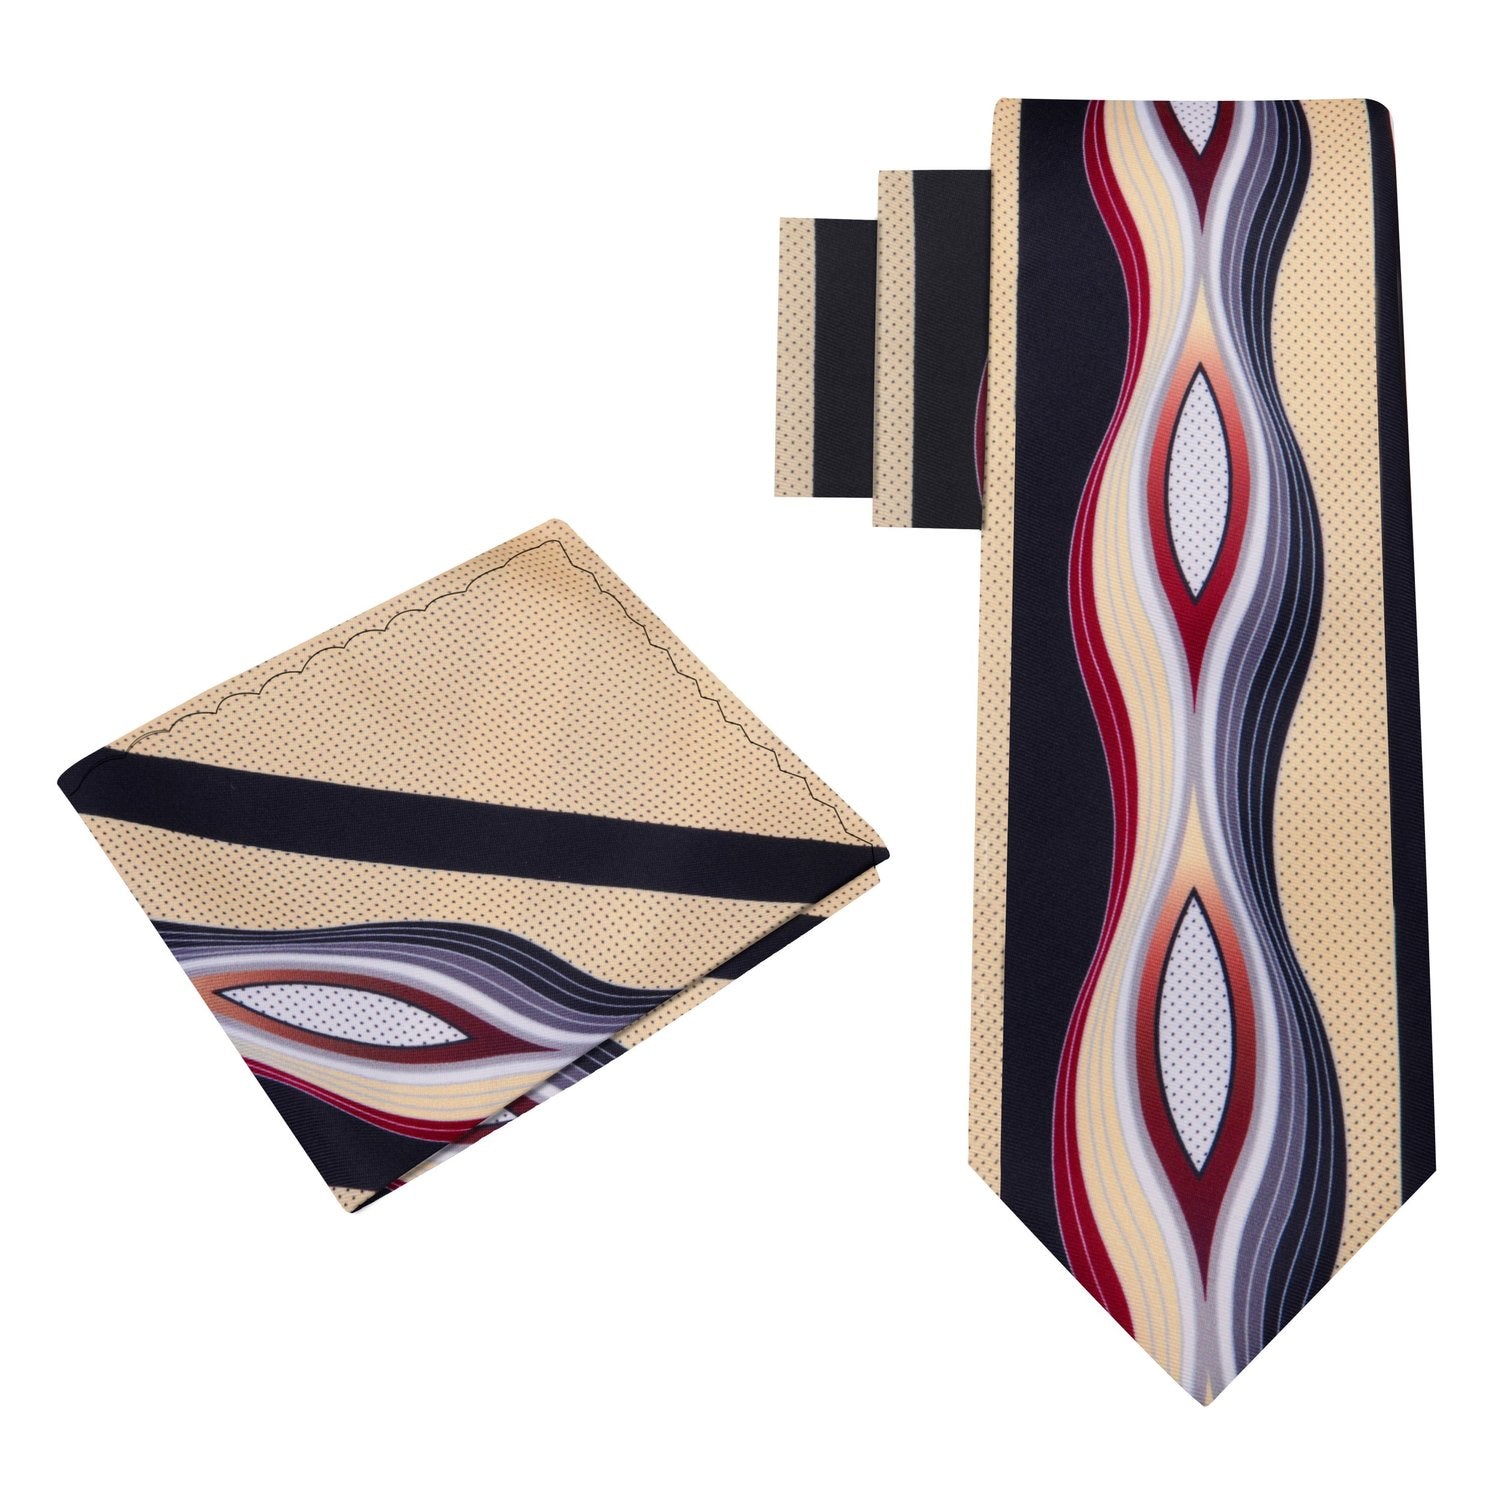 Alt View: Brown, Grey, Red Abstract Tie and Pocket Square